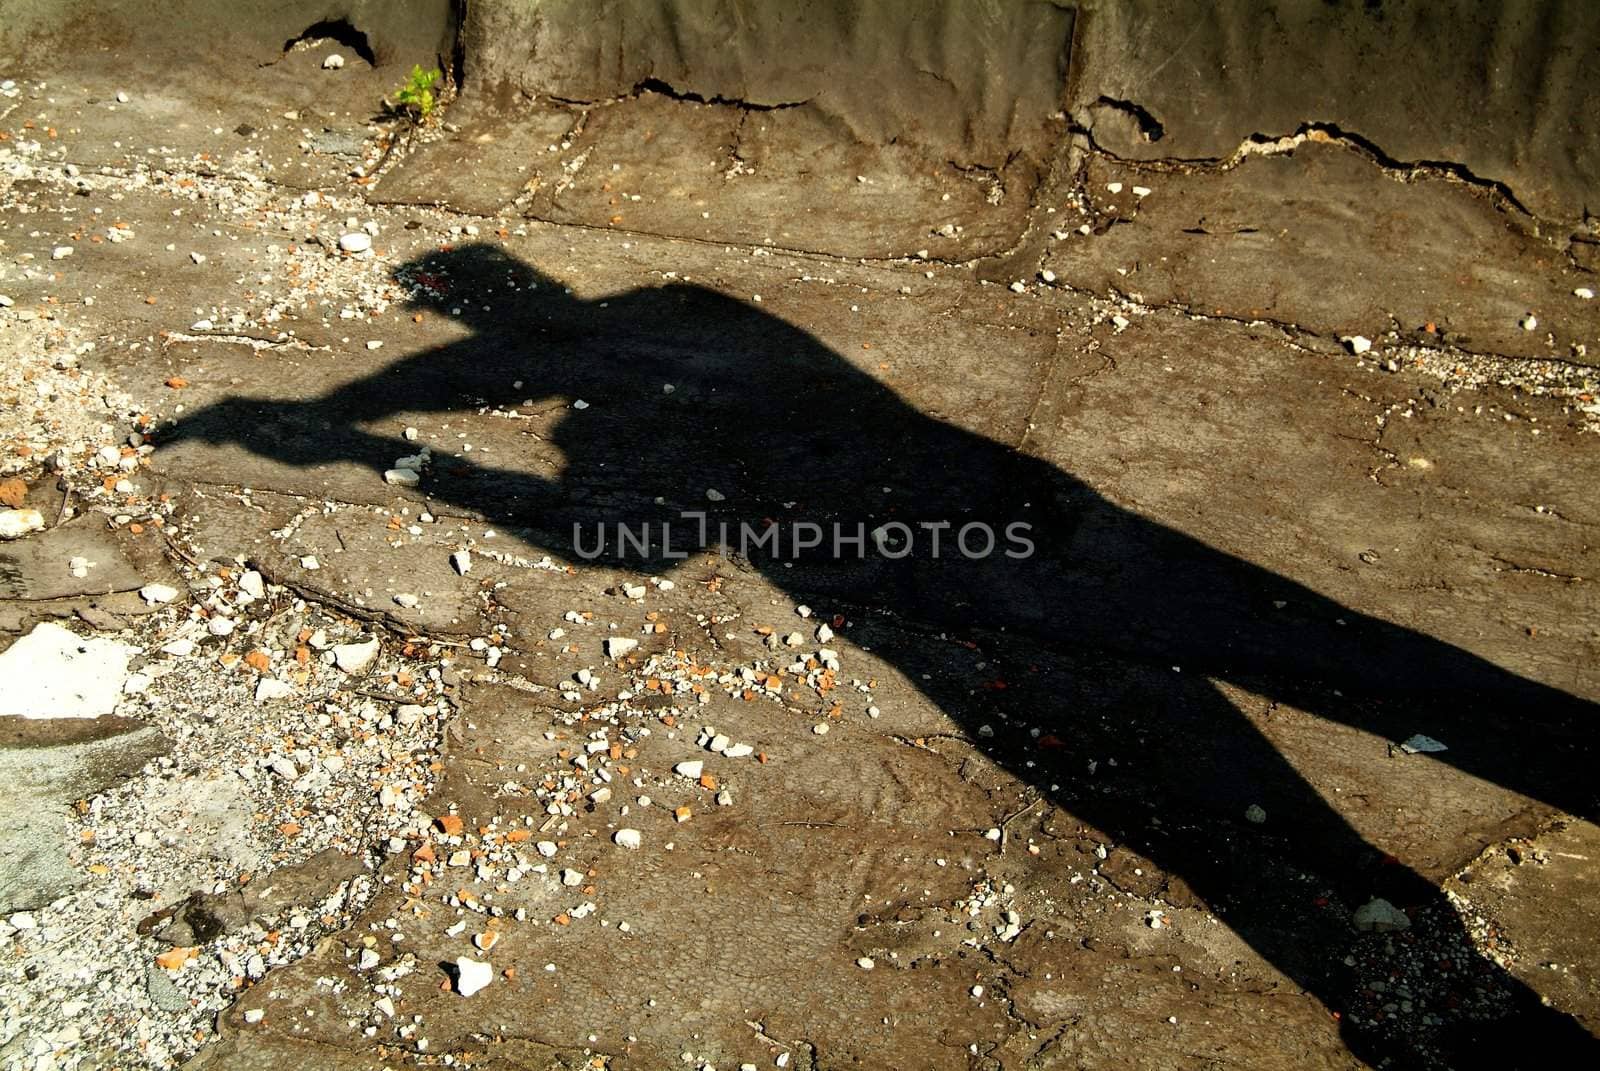 The Shadow of soldier with a gun